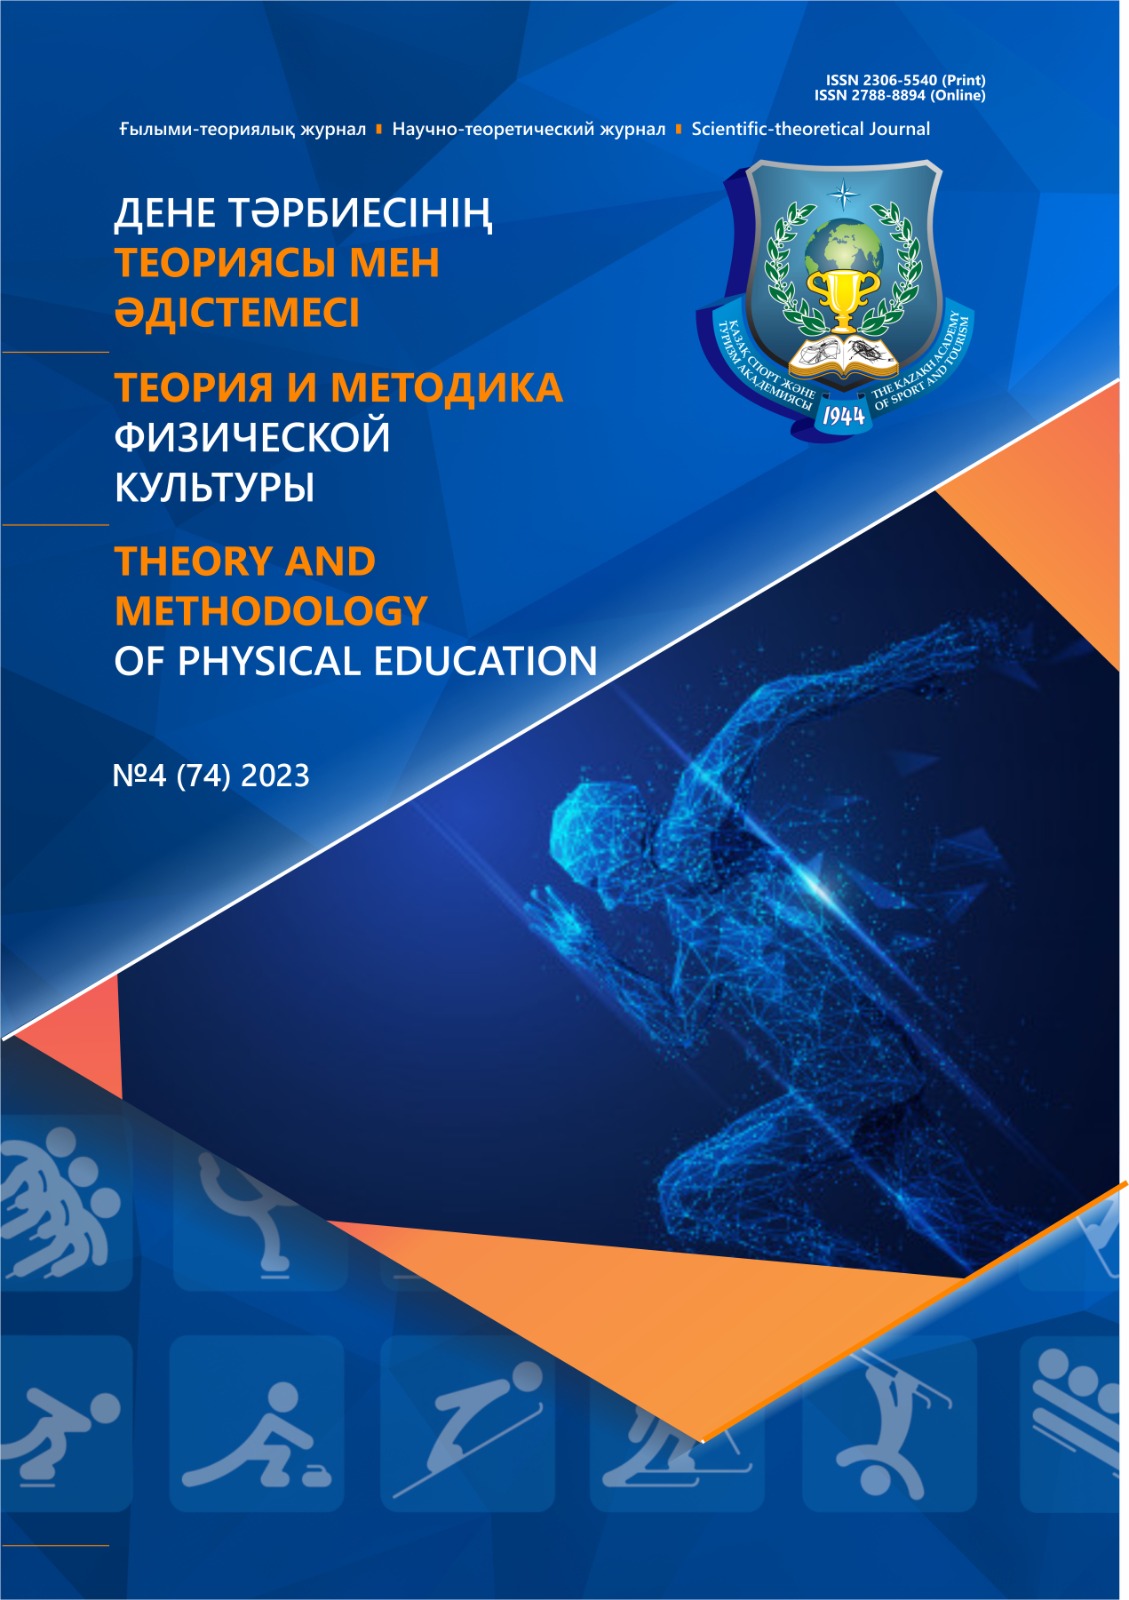 					View Vol. 74 No. 4 (2023): THEORY AND METHODOLOGY OF PHYSICAL EDUCATION
				